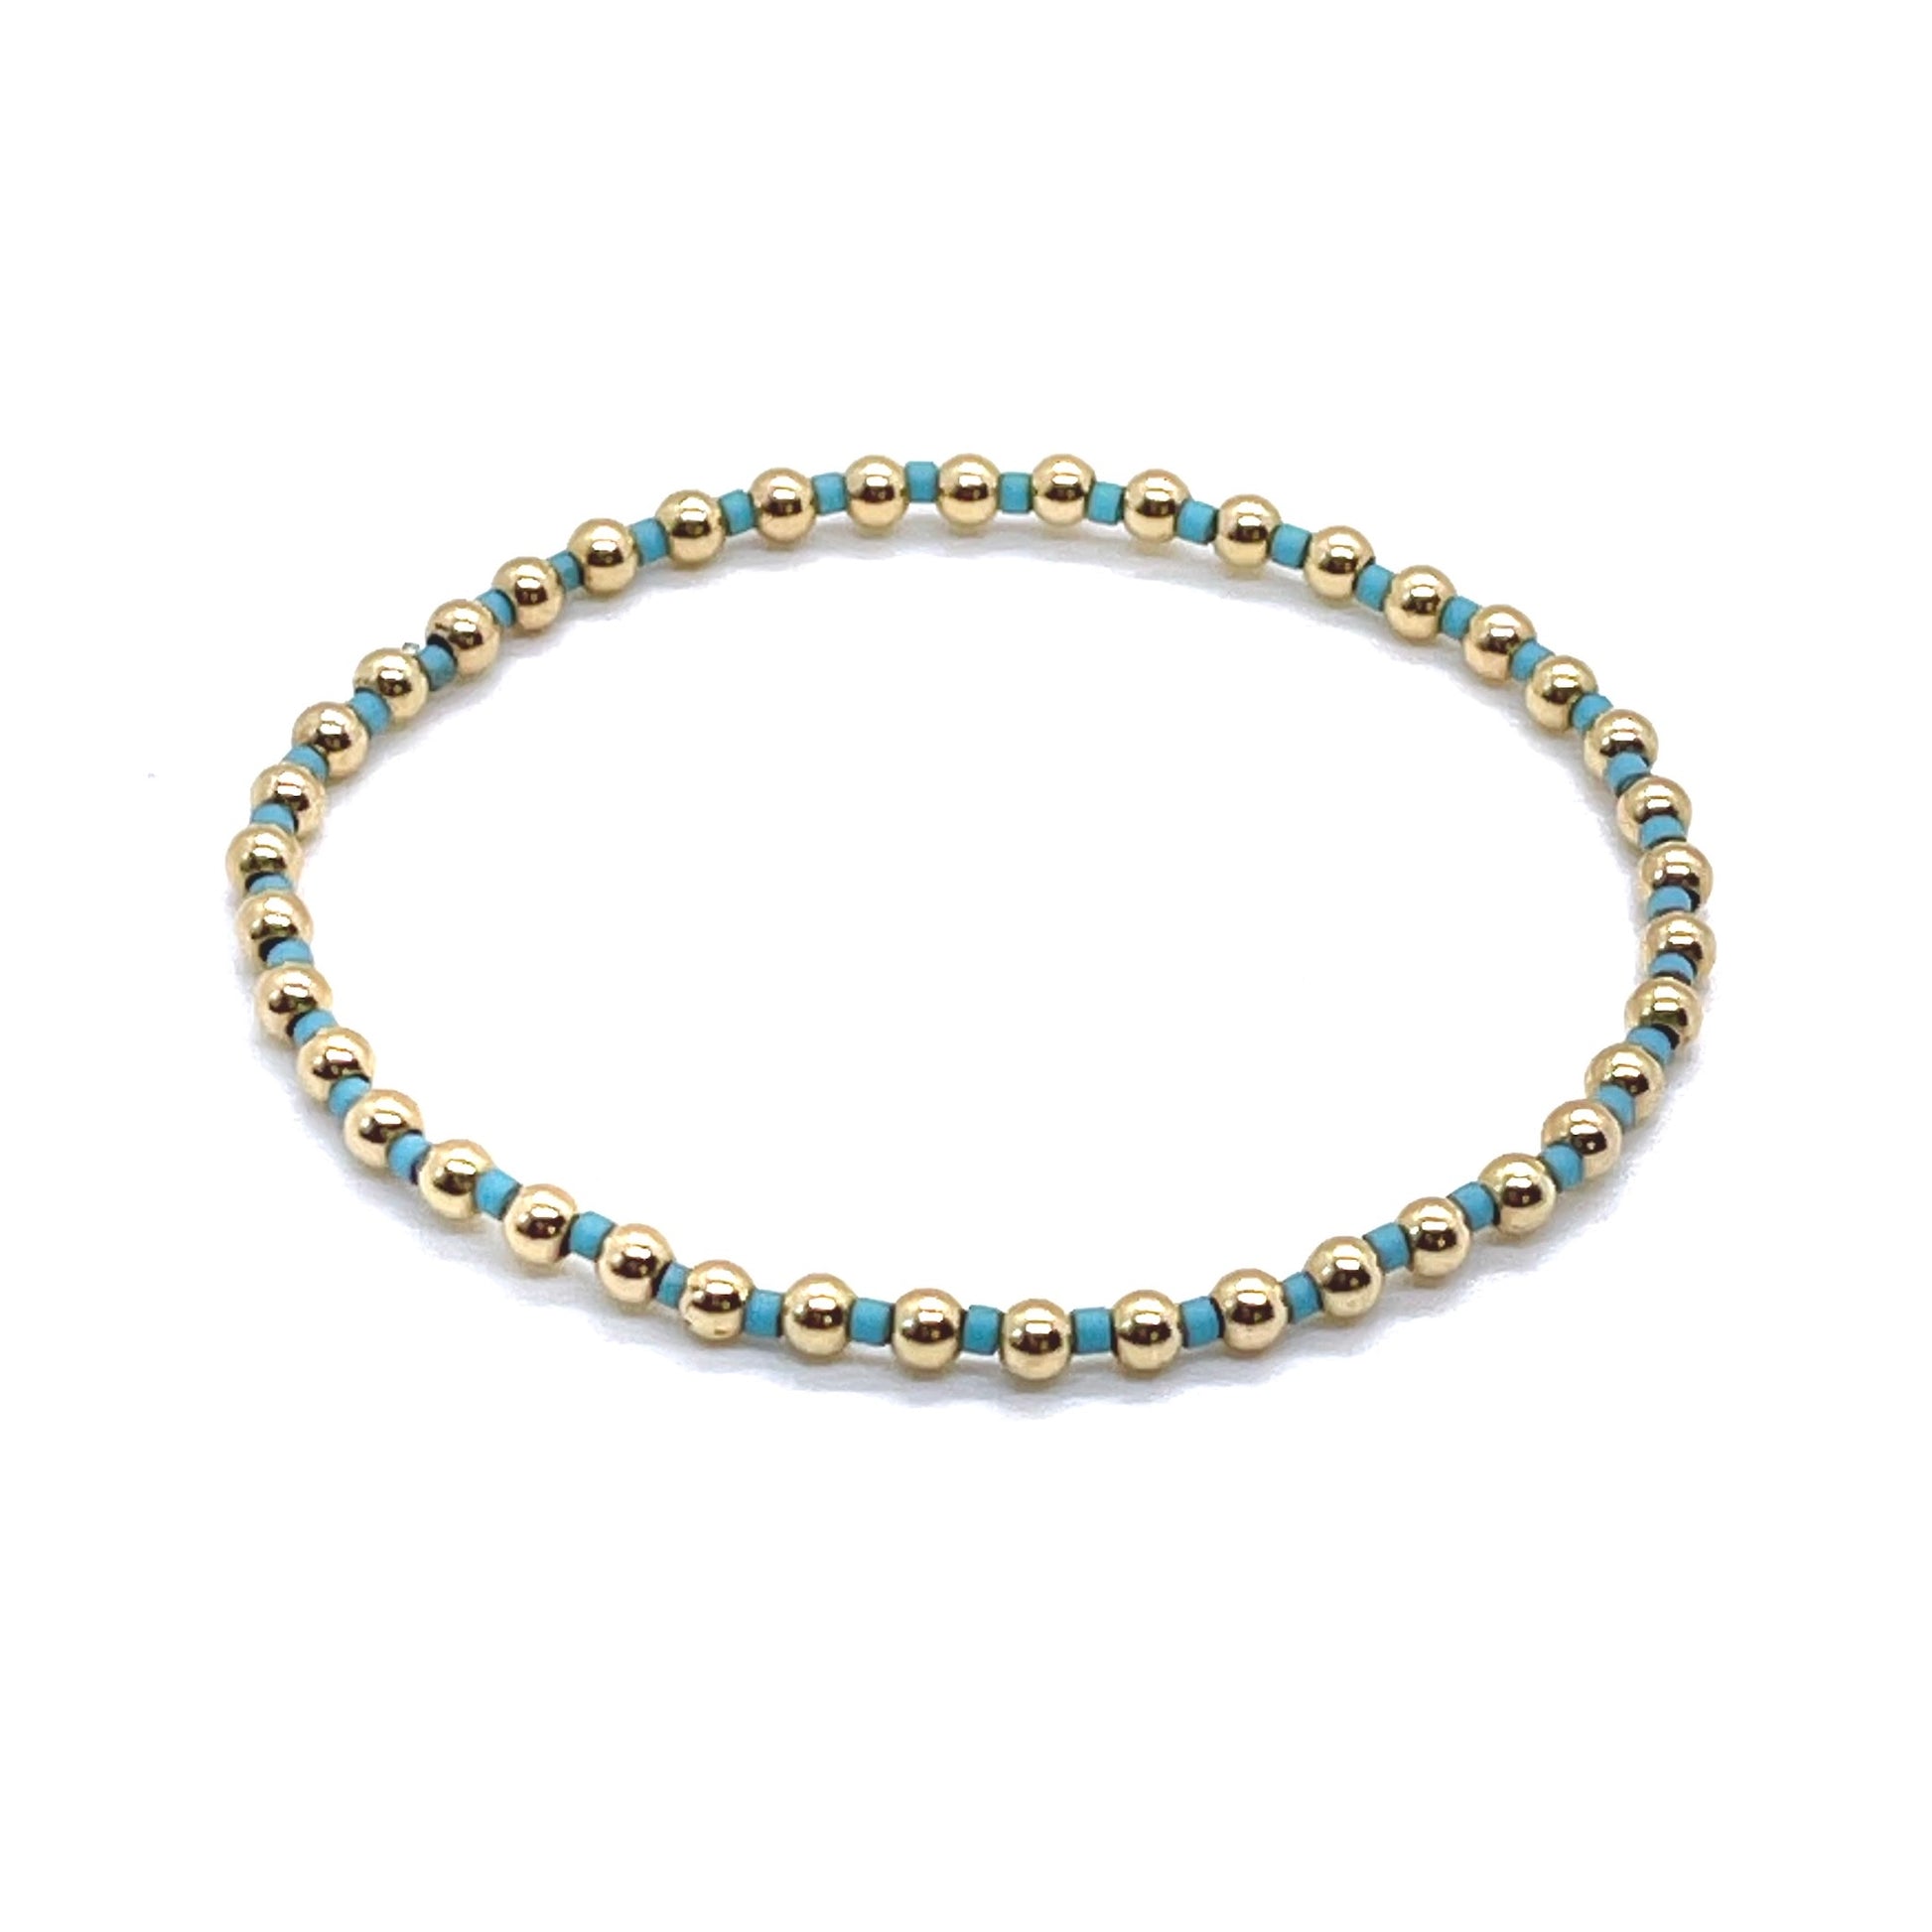 Gold beaded bracelet with alternating turquoise blue seed beads on stretch cord.